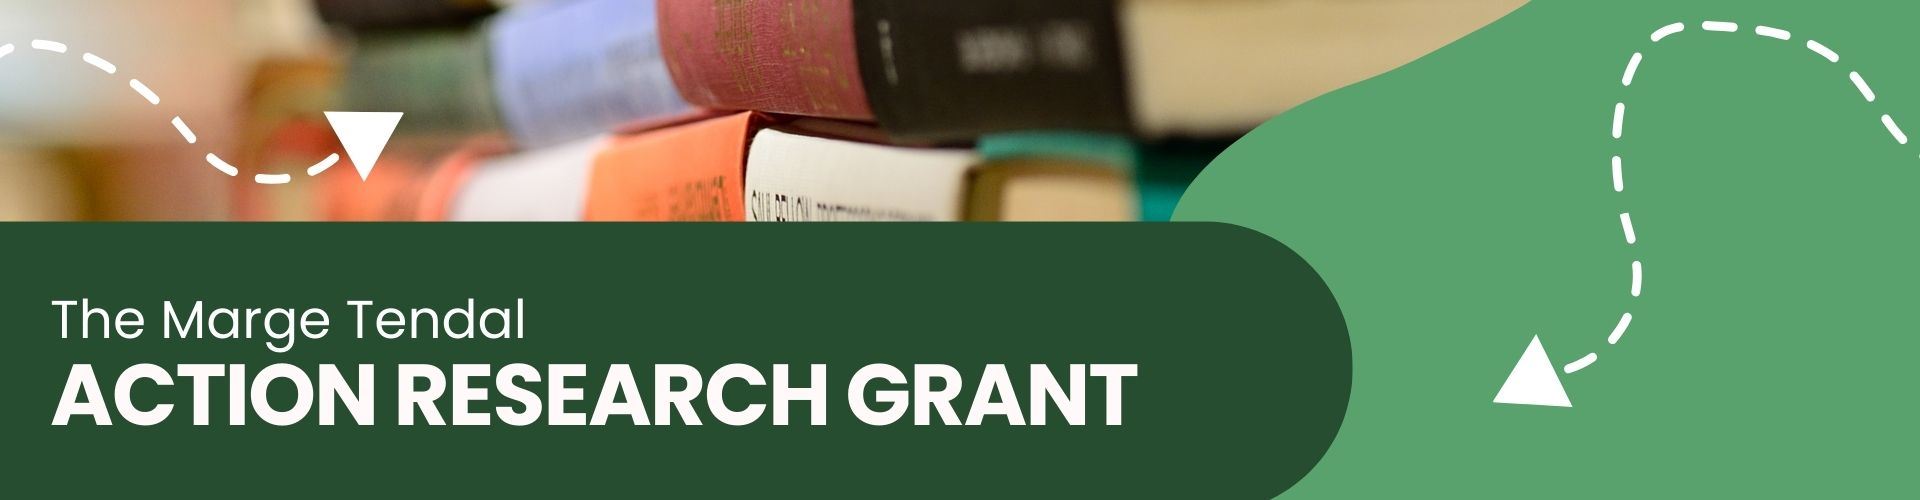 Action Research Grant